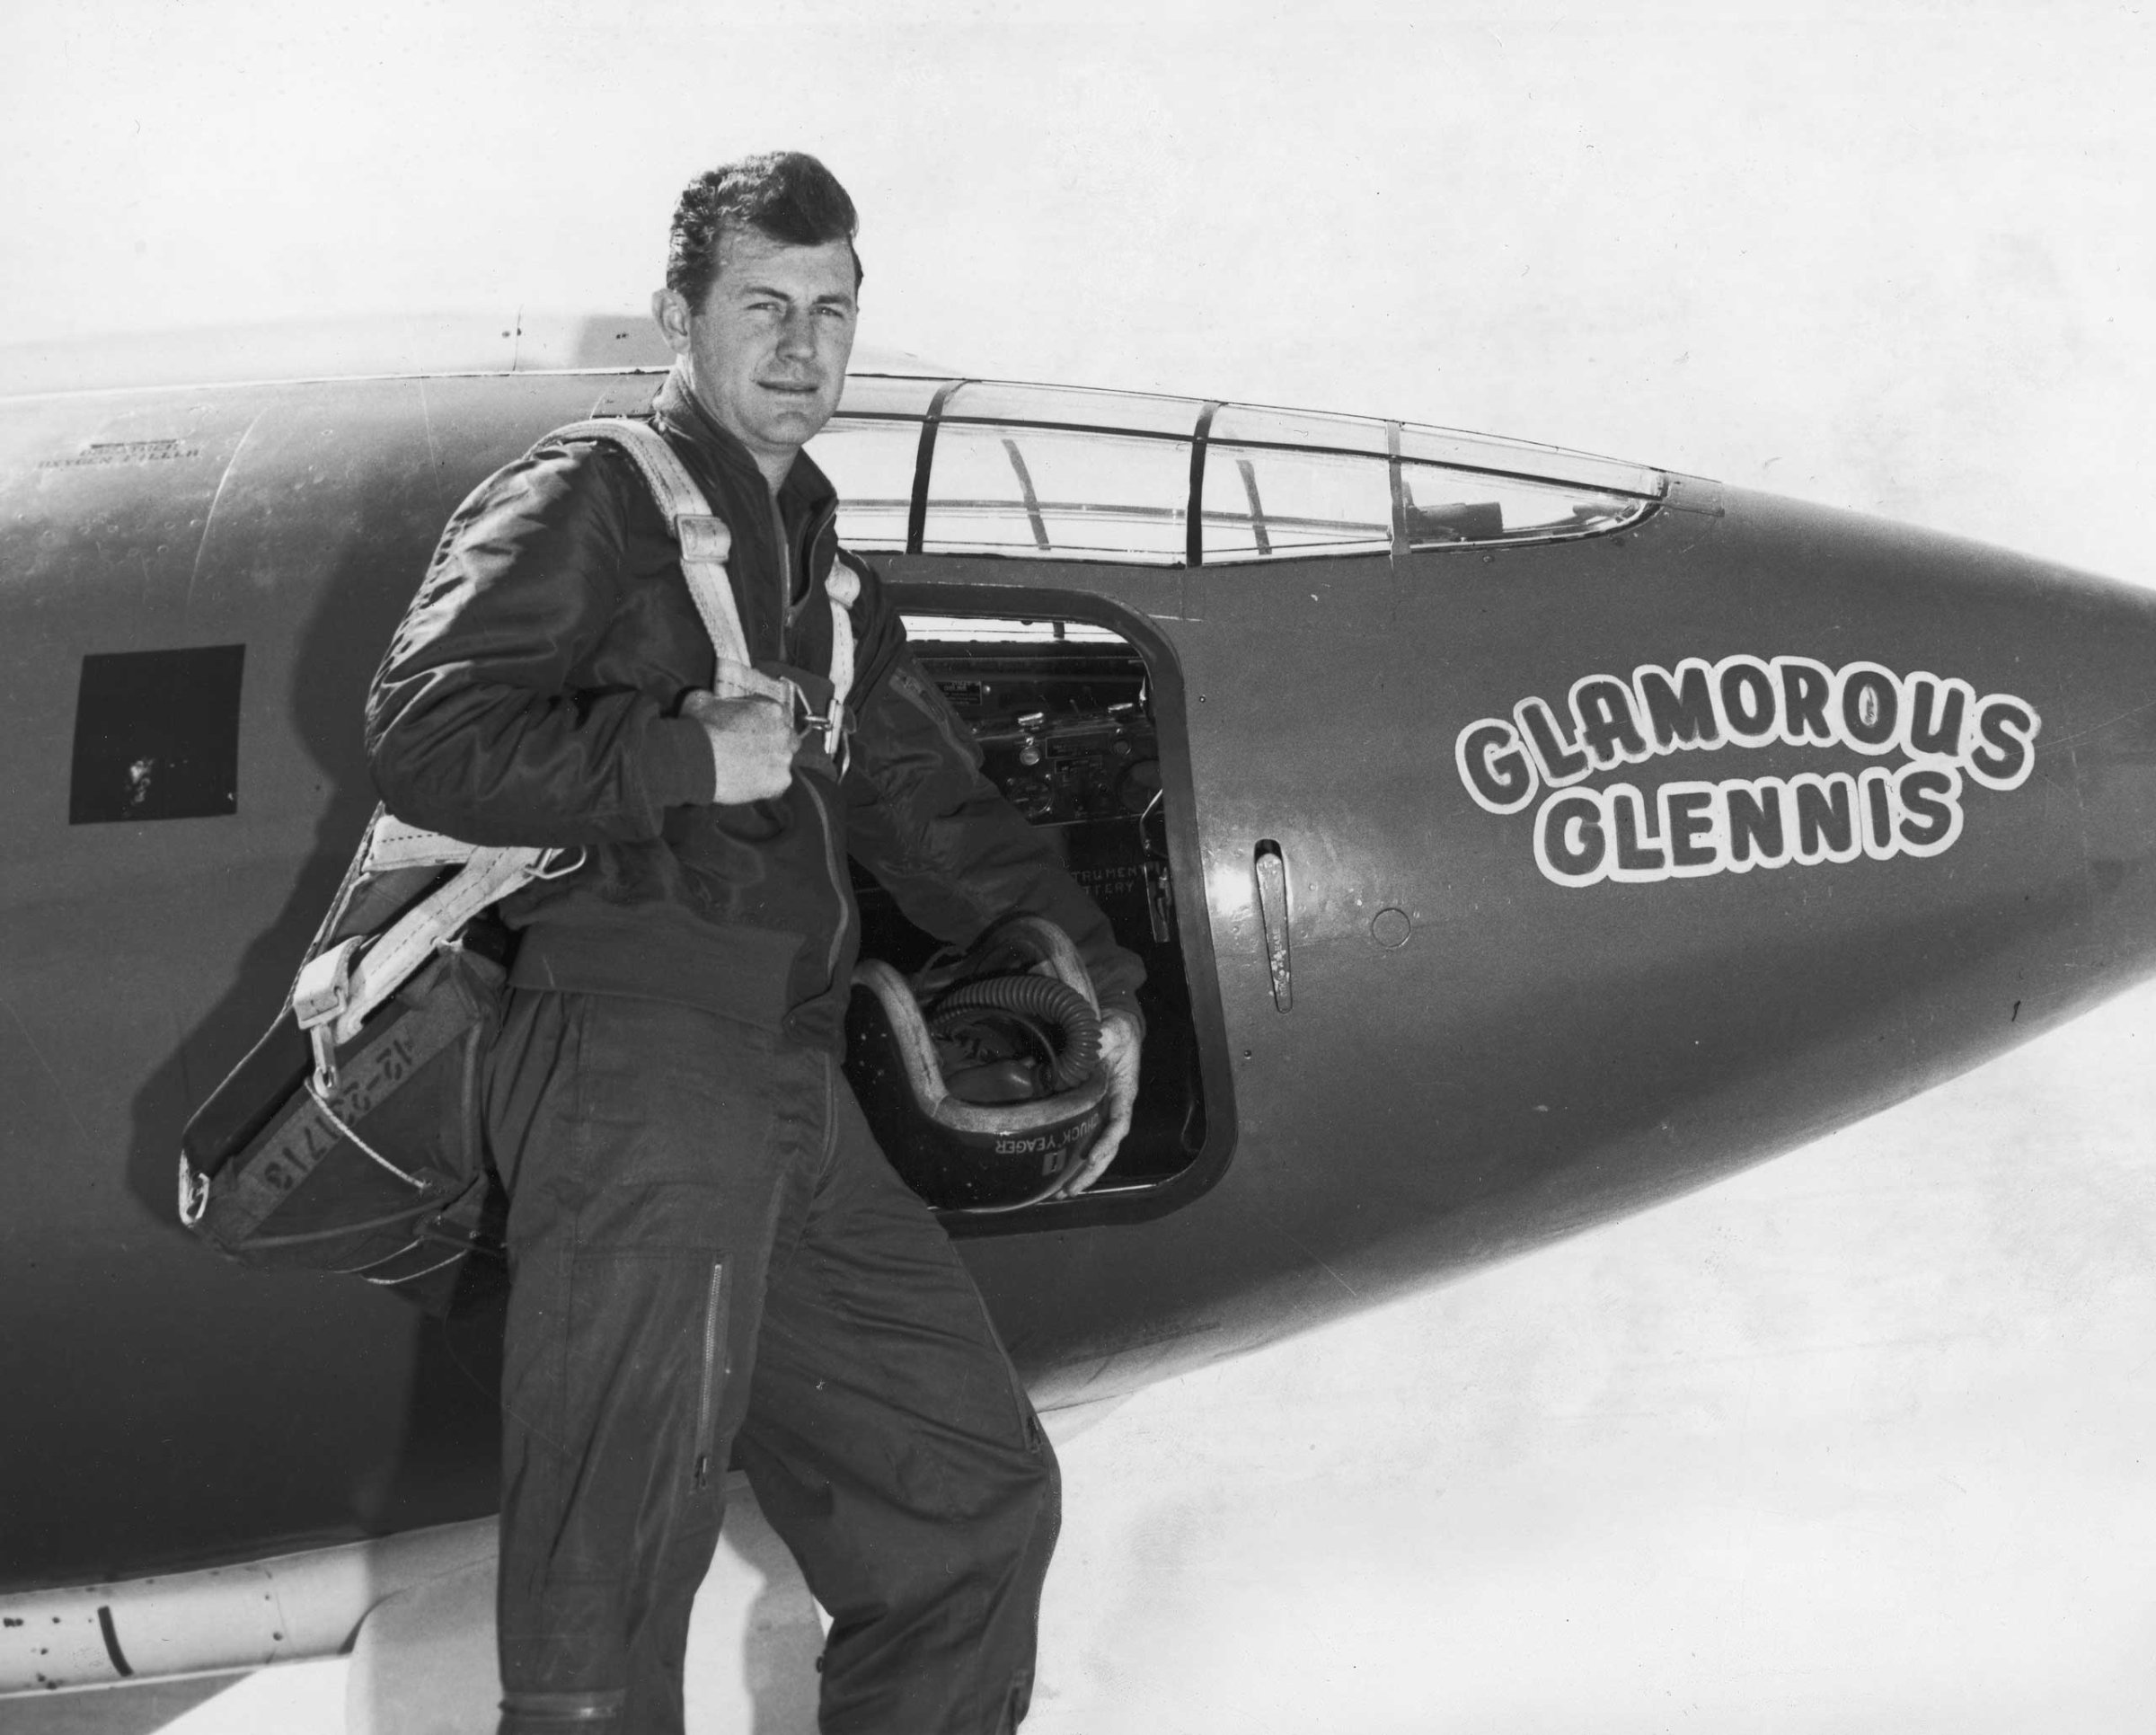 United States Air Force Capt. Chuck Yeager stands beside the plane in which he became the first pilot to break the sound barrier, 1947.